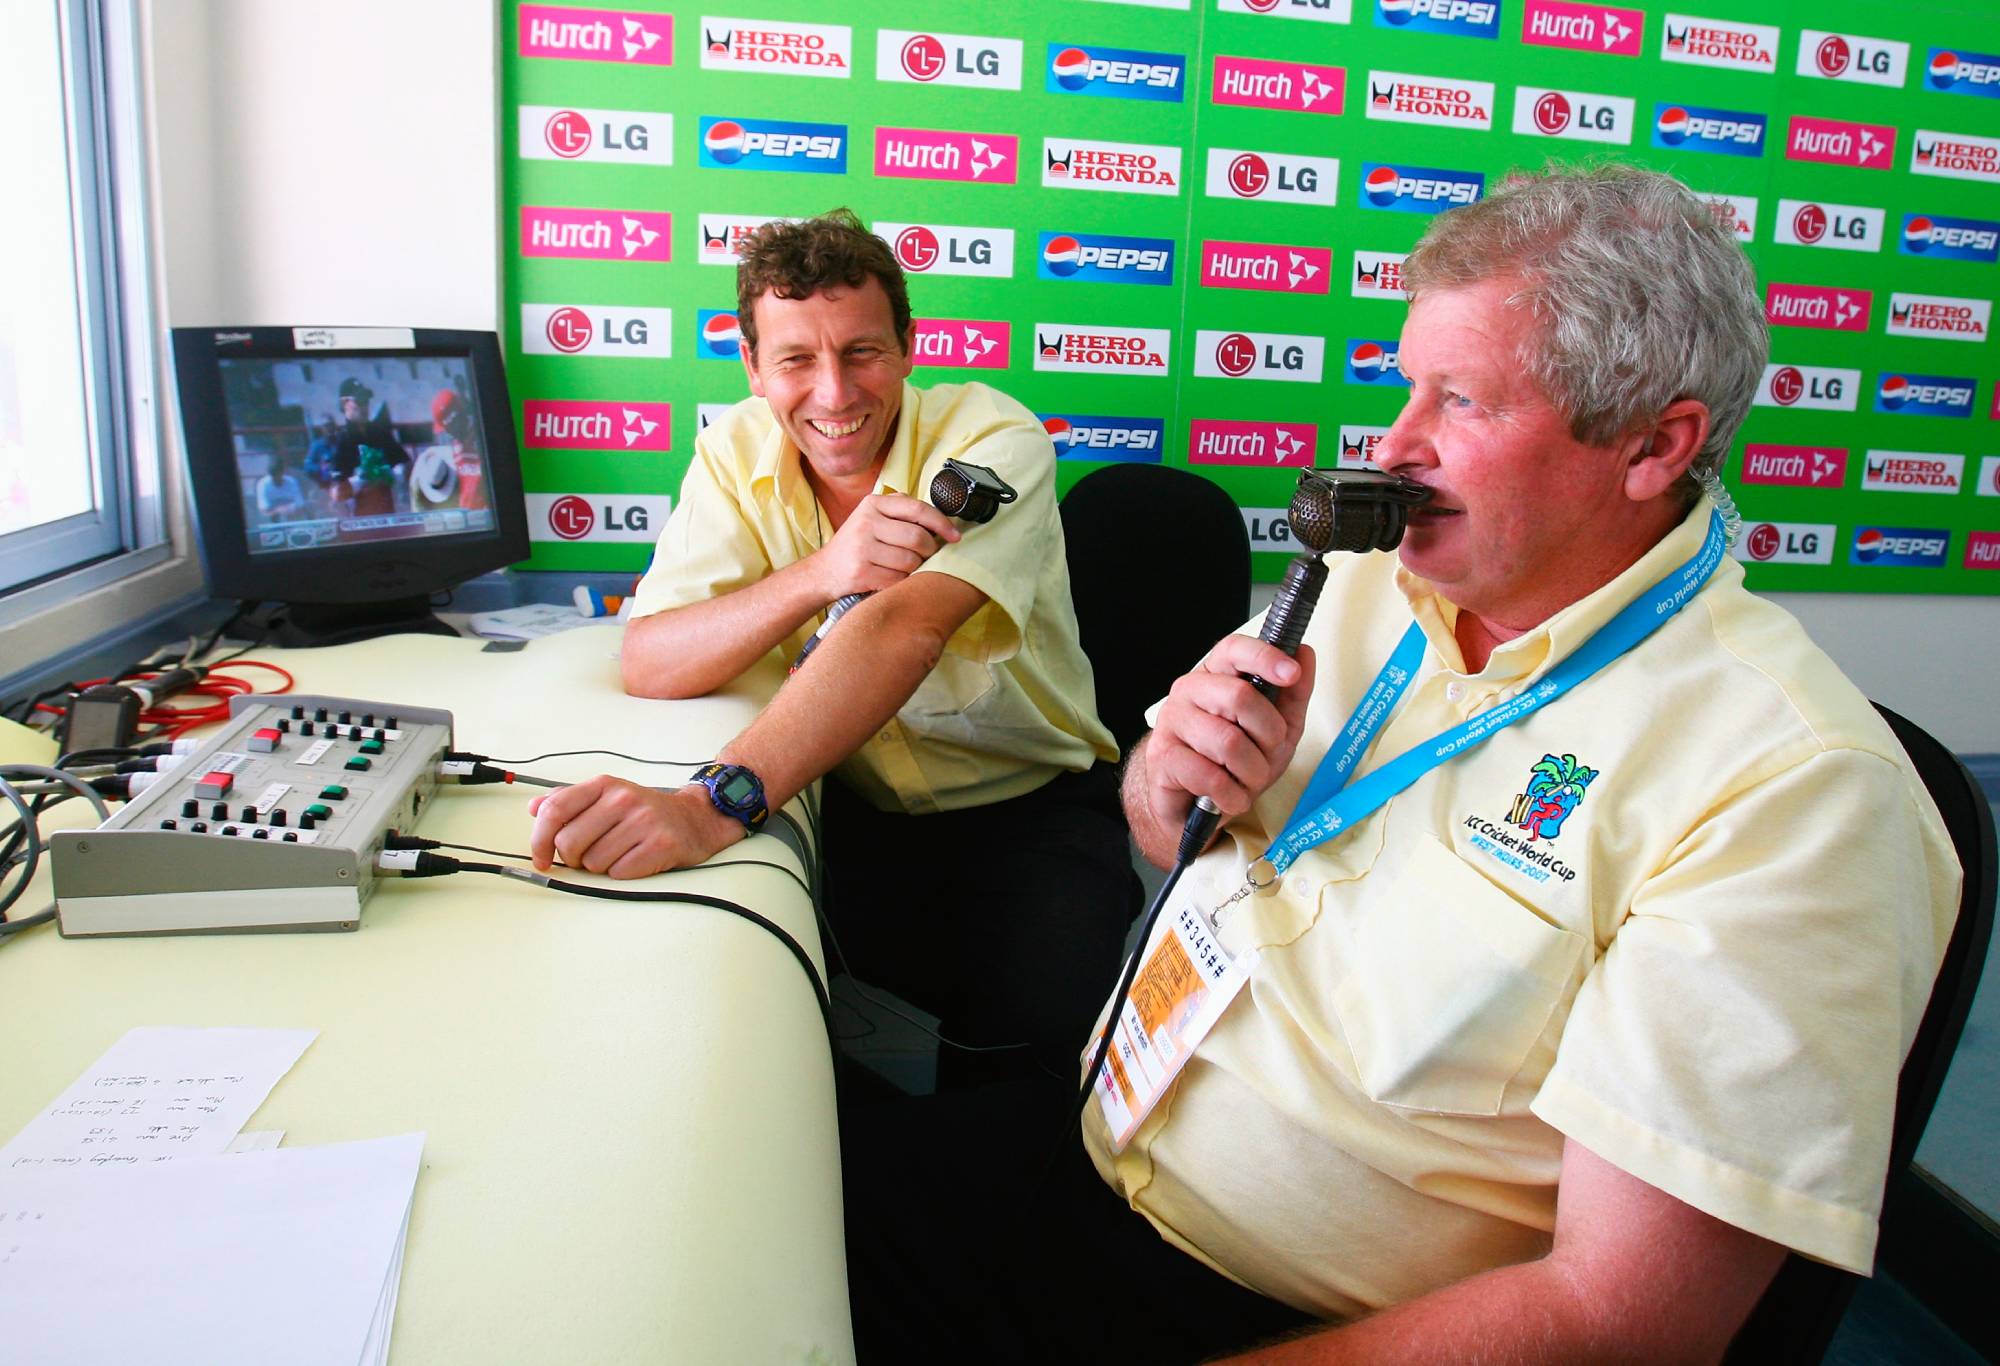 GROS ISLET, SAINT LUCIA - MARCH 22: Commentators Michael Atherton (L) and Ian Smith look on during the ICC Cricket World Cup Group C match between Canada and New Zealand at the Beausejour Cricket Ground on March 22, 2007 in Gros Islet, Saint Lucia.  (Photo by Tom Shaw/Getty Images)